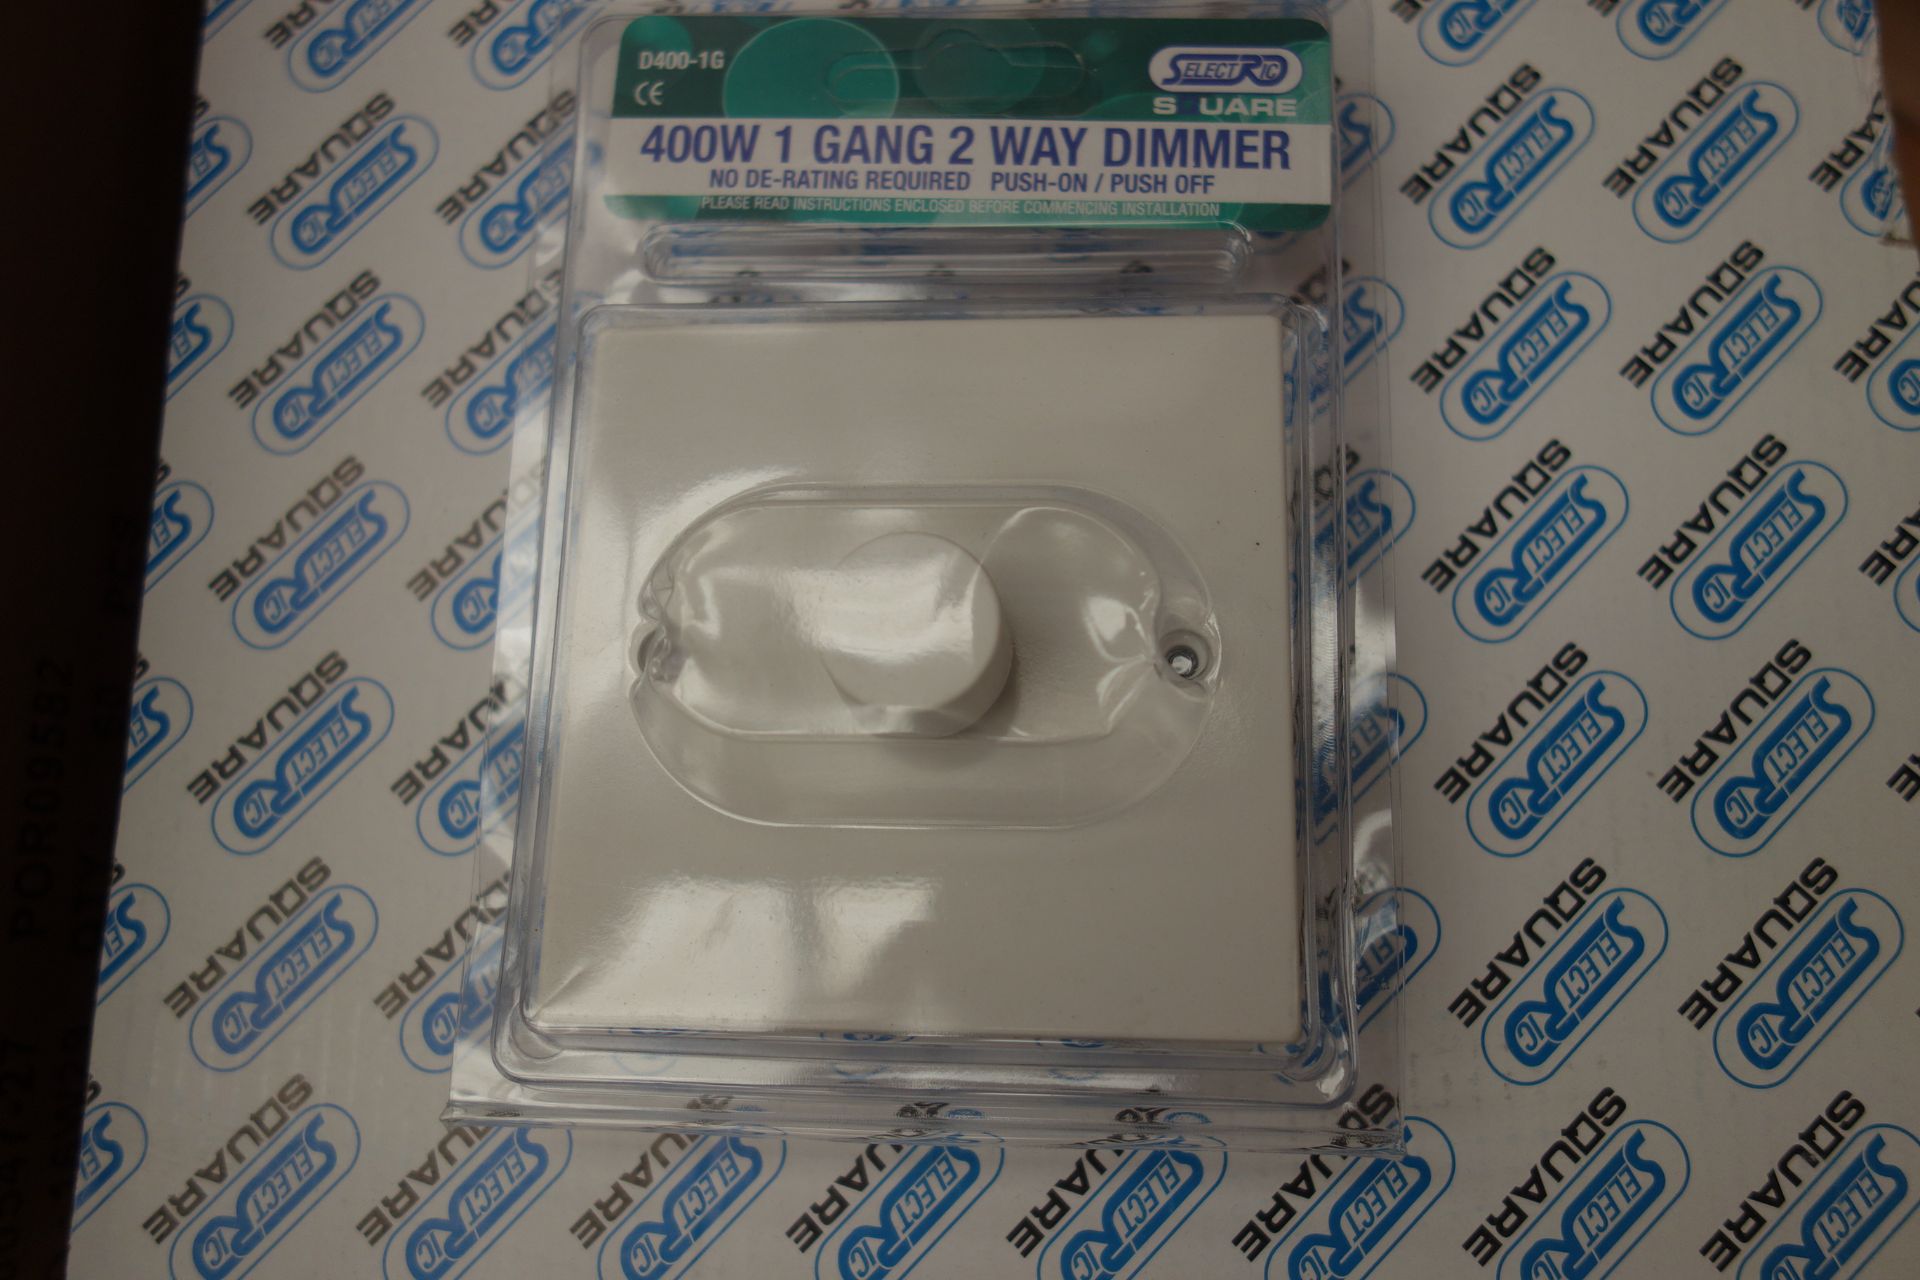 100x Selectric D400-IG 1 GANG 2 Way 400w Push On/Off Dimmer. No-DE-Rating Required. White